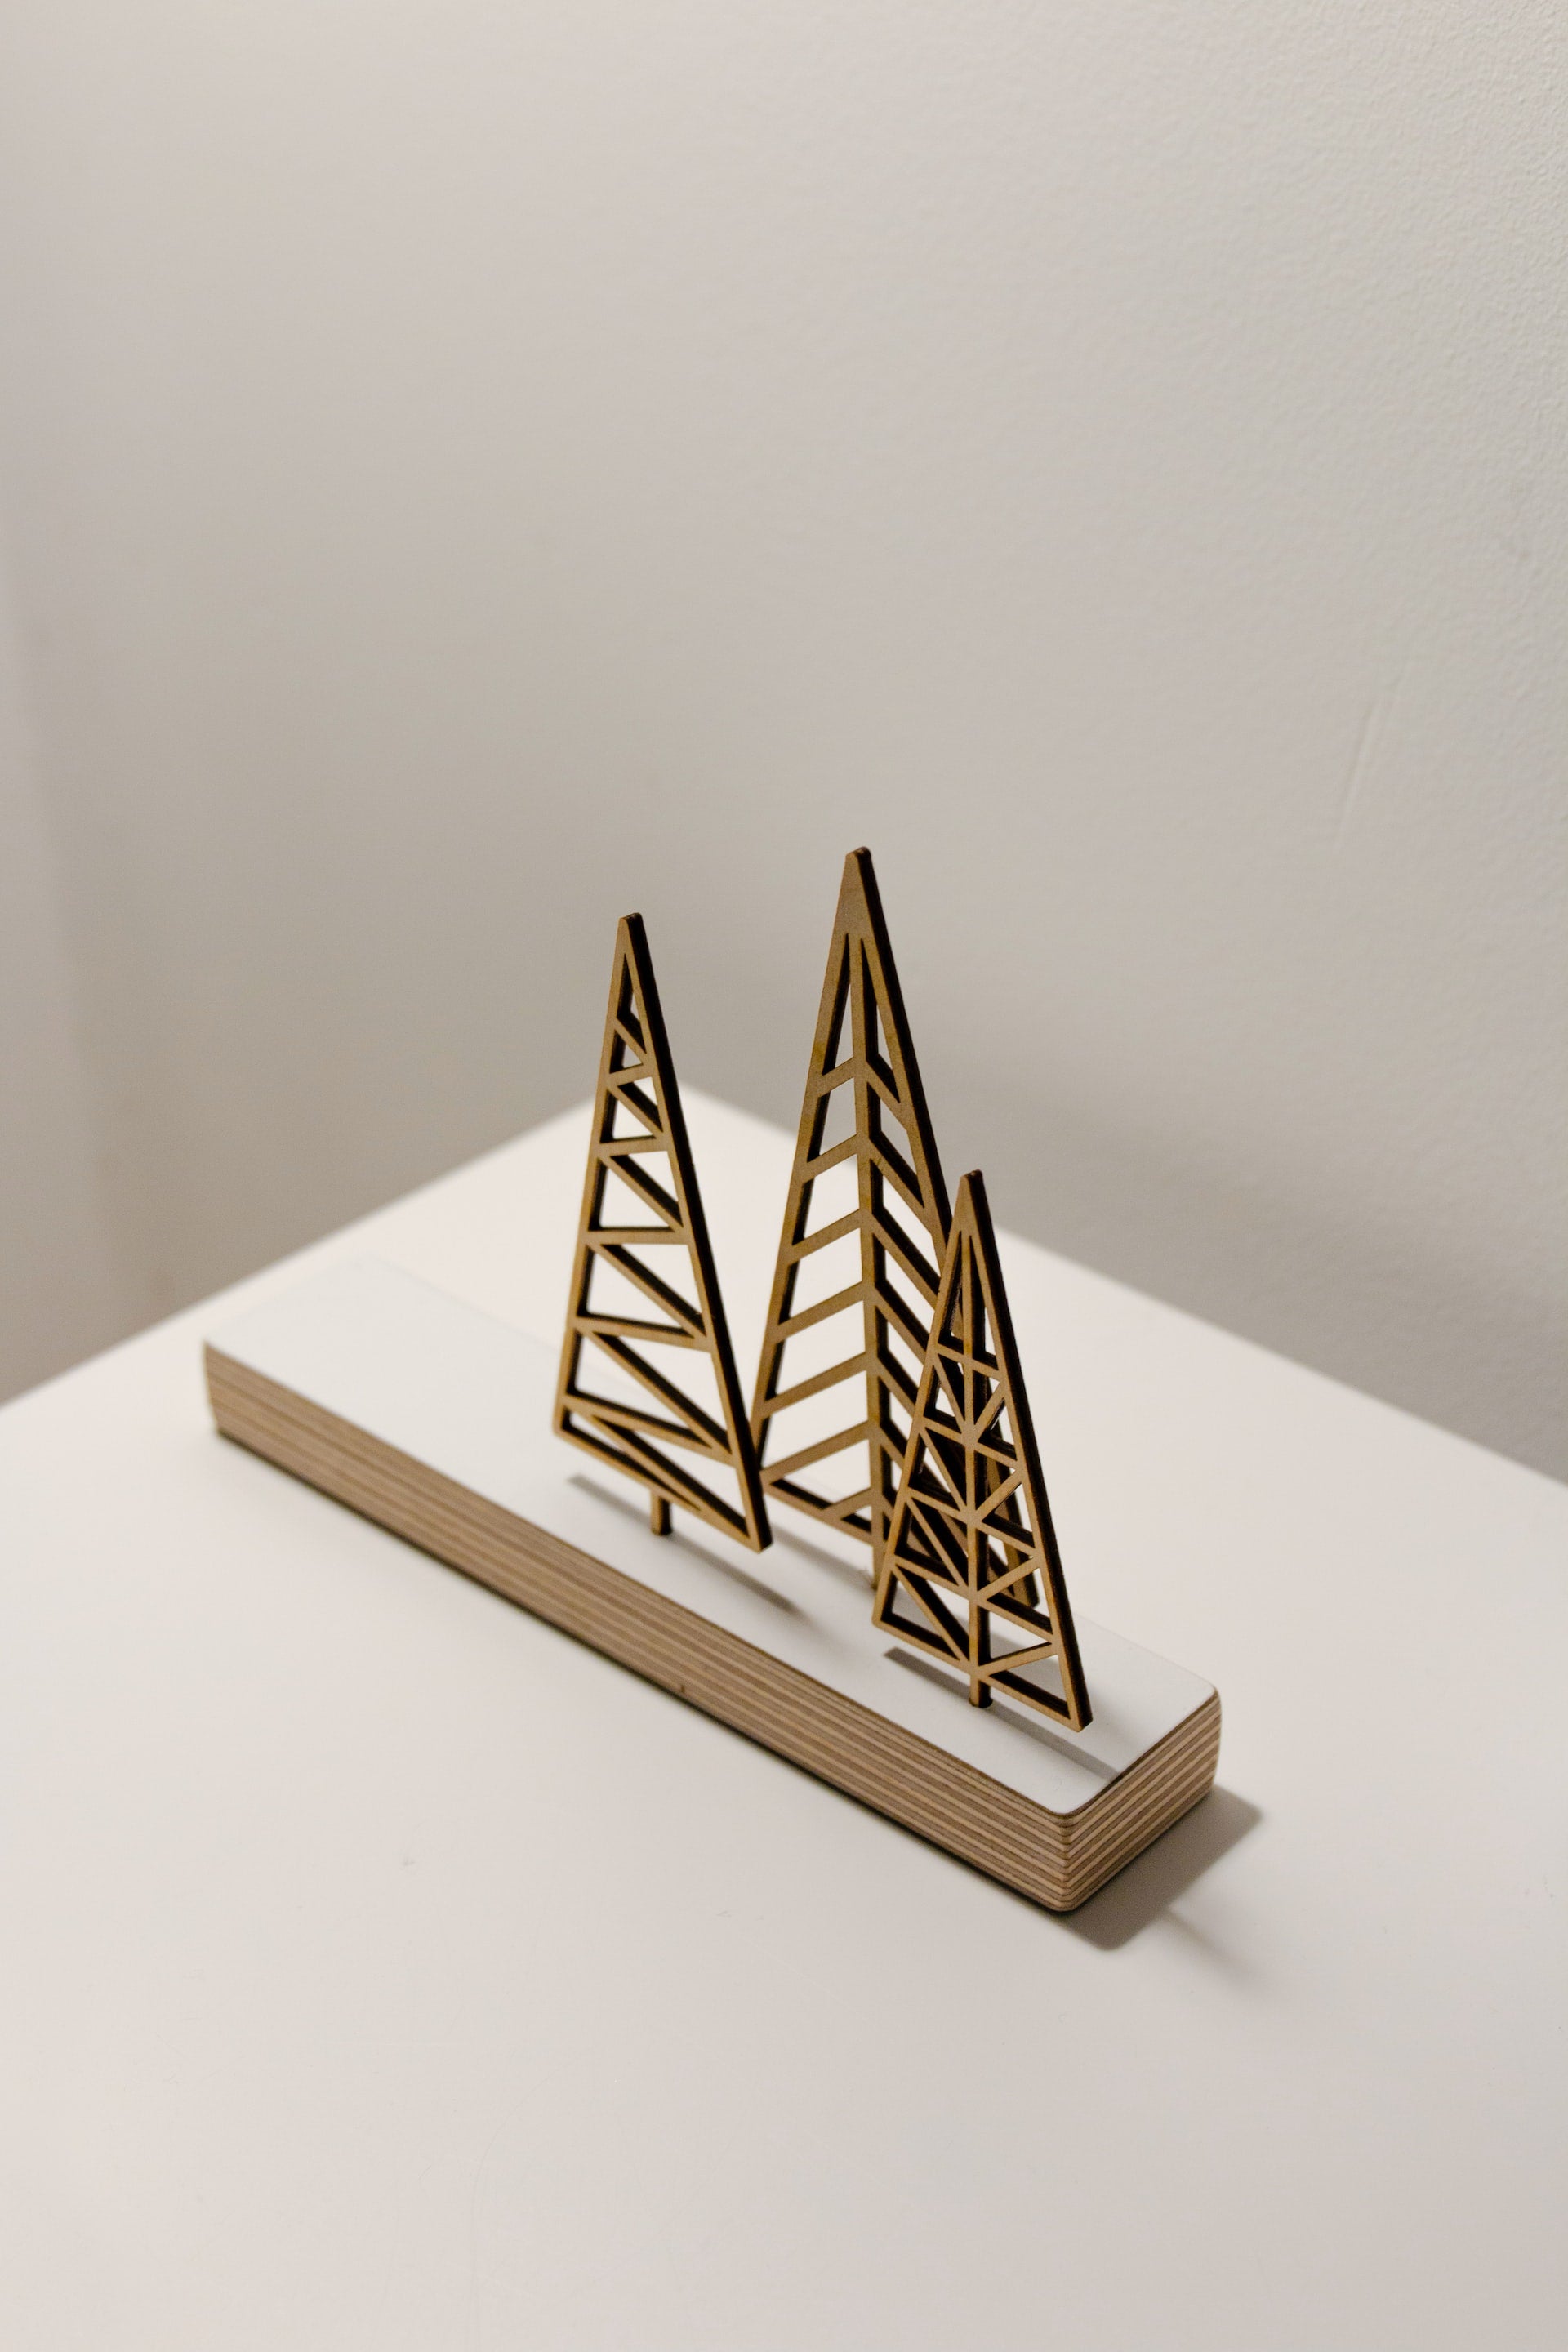  From simplistic table toppers like this one to complex 3D constructs, Christmas tree table toppers are best sellers in the holiday season.